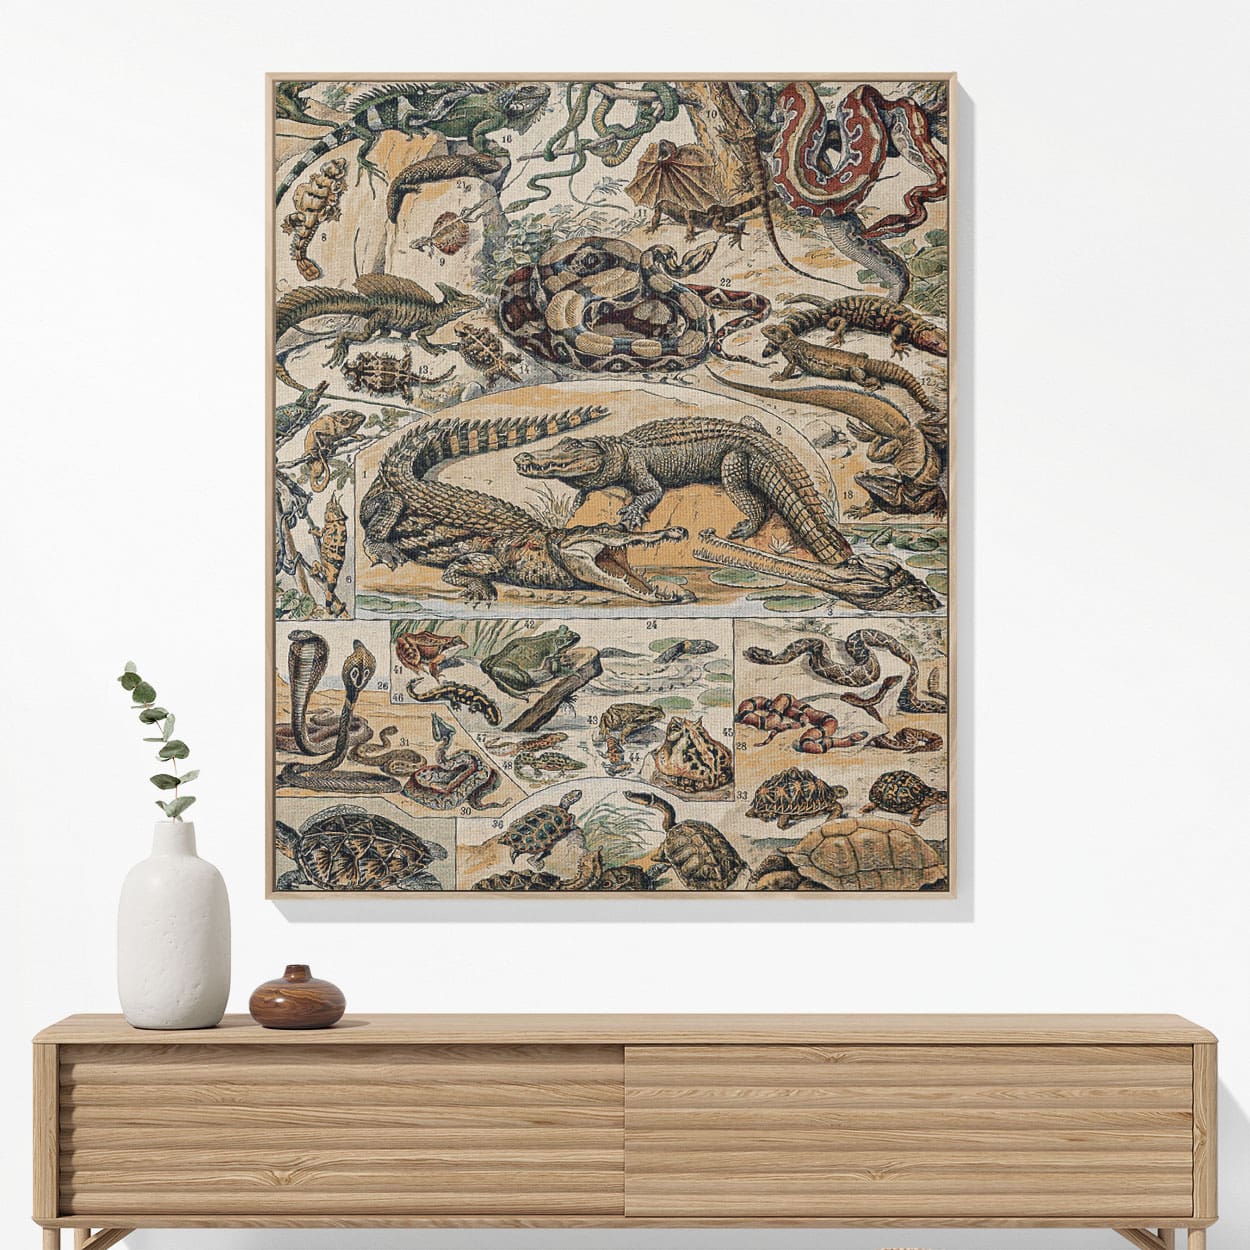 Exotic Animals Woven Blanket Woven Blanket Hanging on a Wall as Framed Wall Art